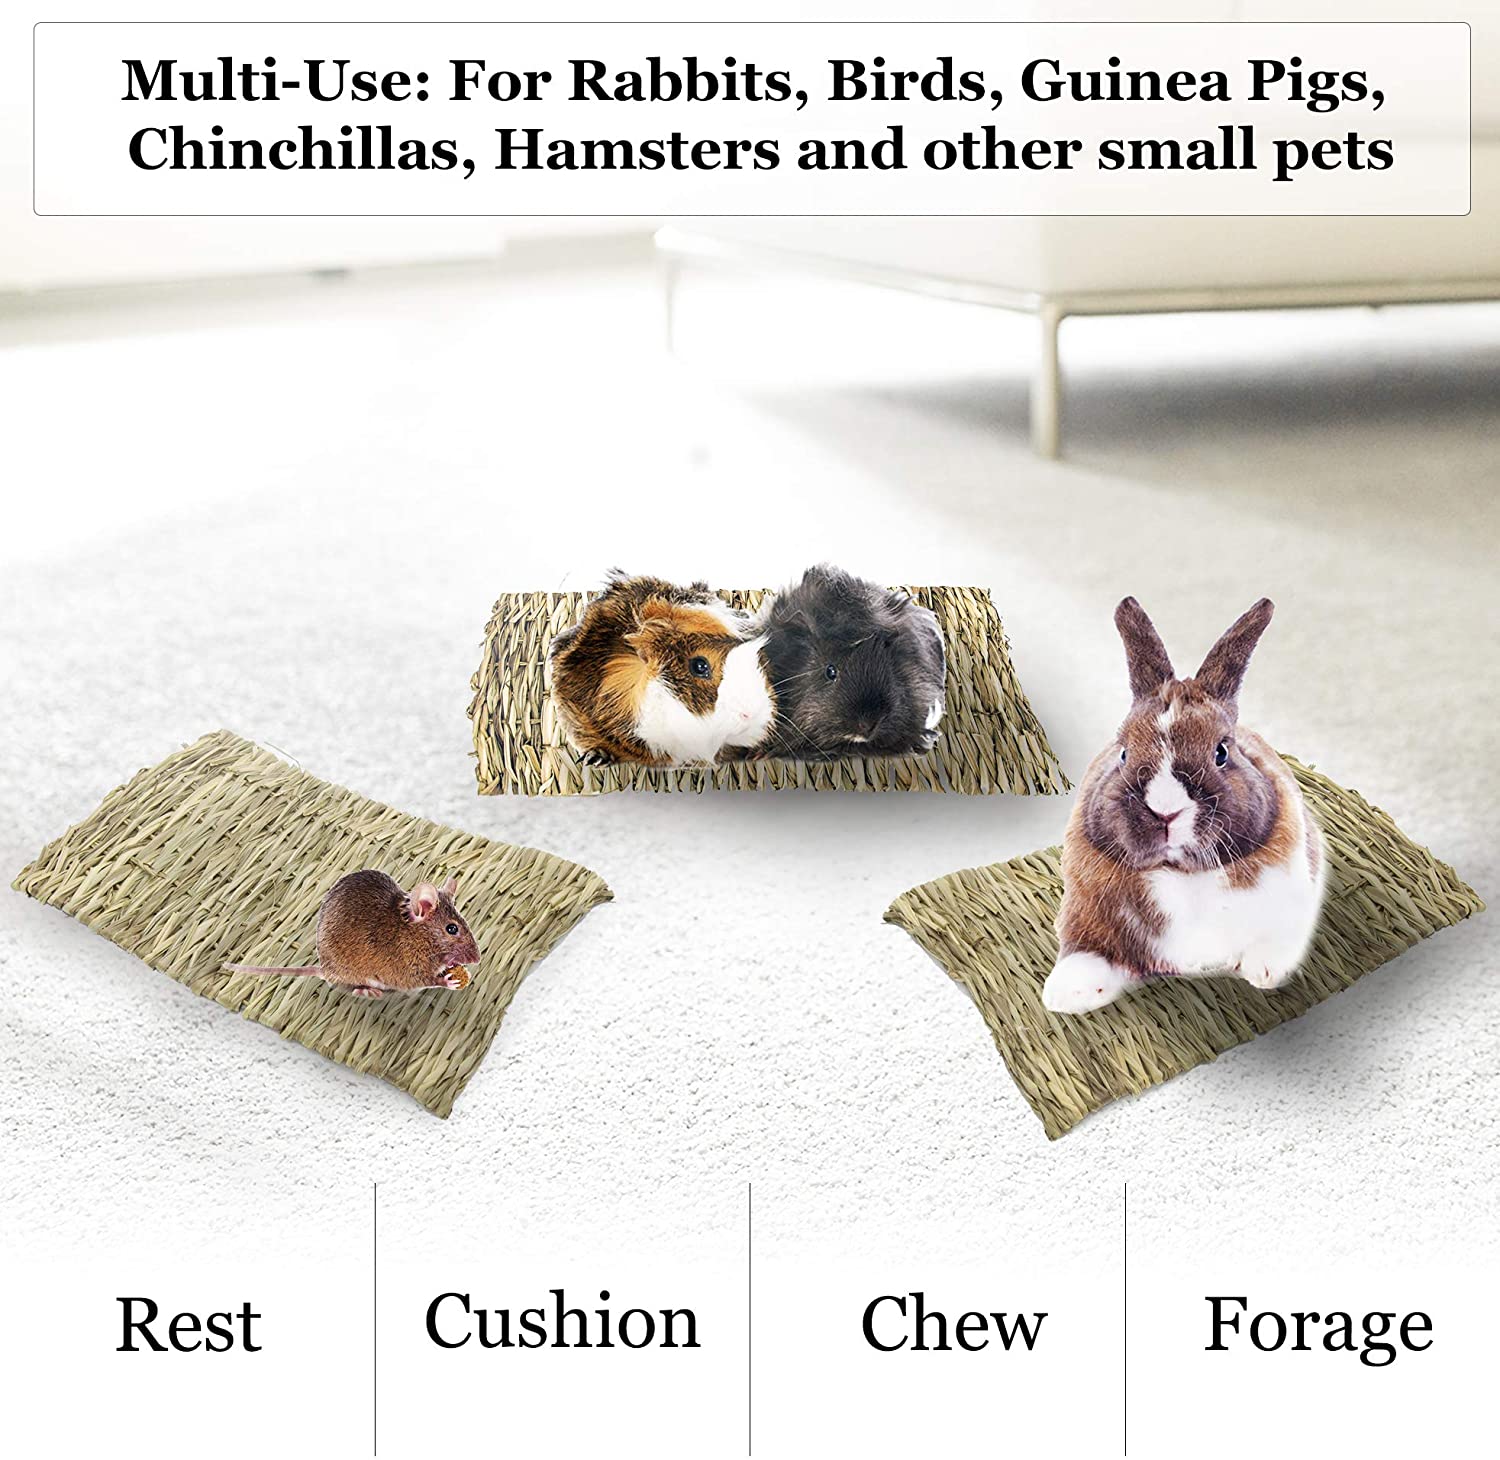 BLSMU Rabbit Hay Mat,Portable Woven Natural Grass Bed with Bedding Activity Toys Chew Grass Ball for Bunny Hamster Chinchillas Guinea Pig Mice Gerbil Ferret 3 Pack 